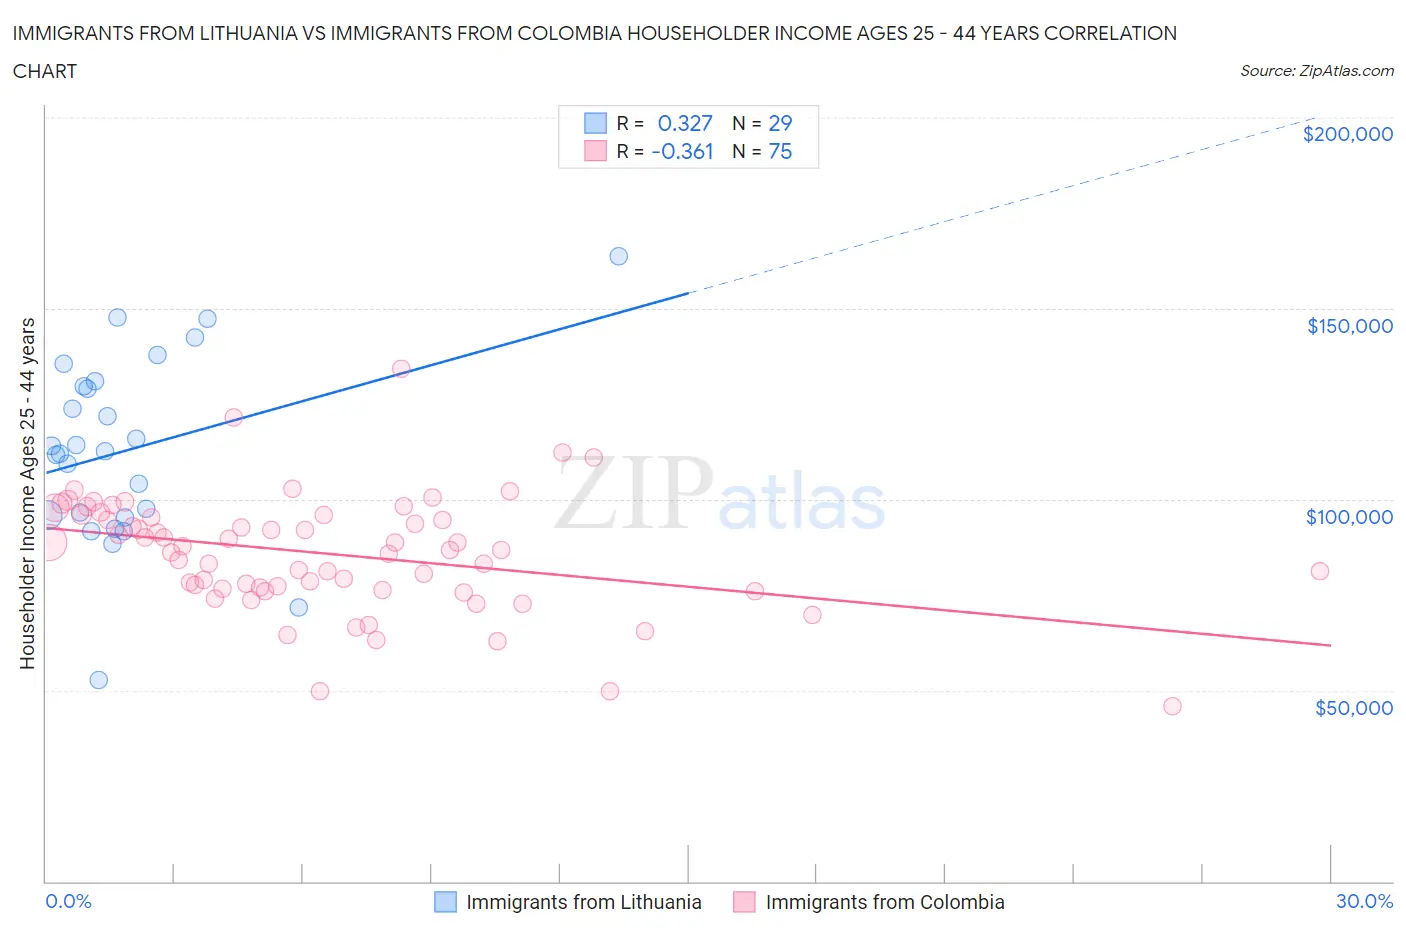 Immigrants from Lithuania vs Immigrants from Colombia Householder Income Ages 25 - 44 years